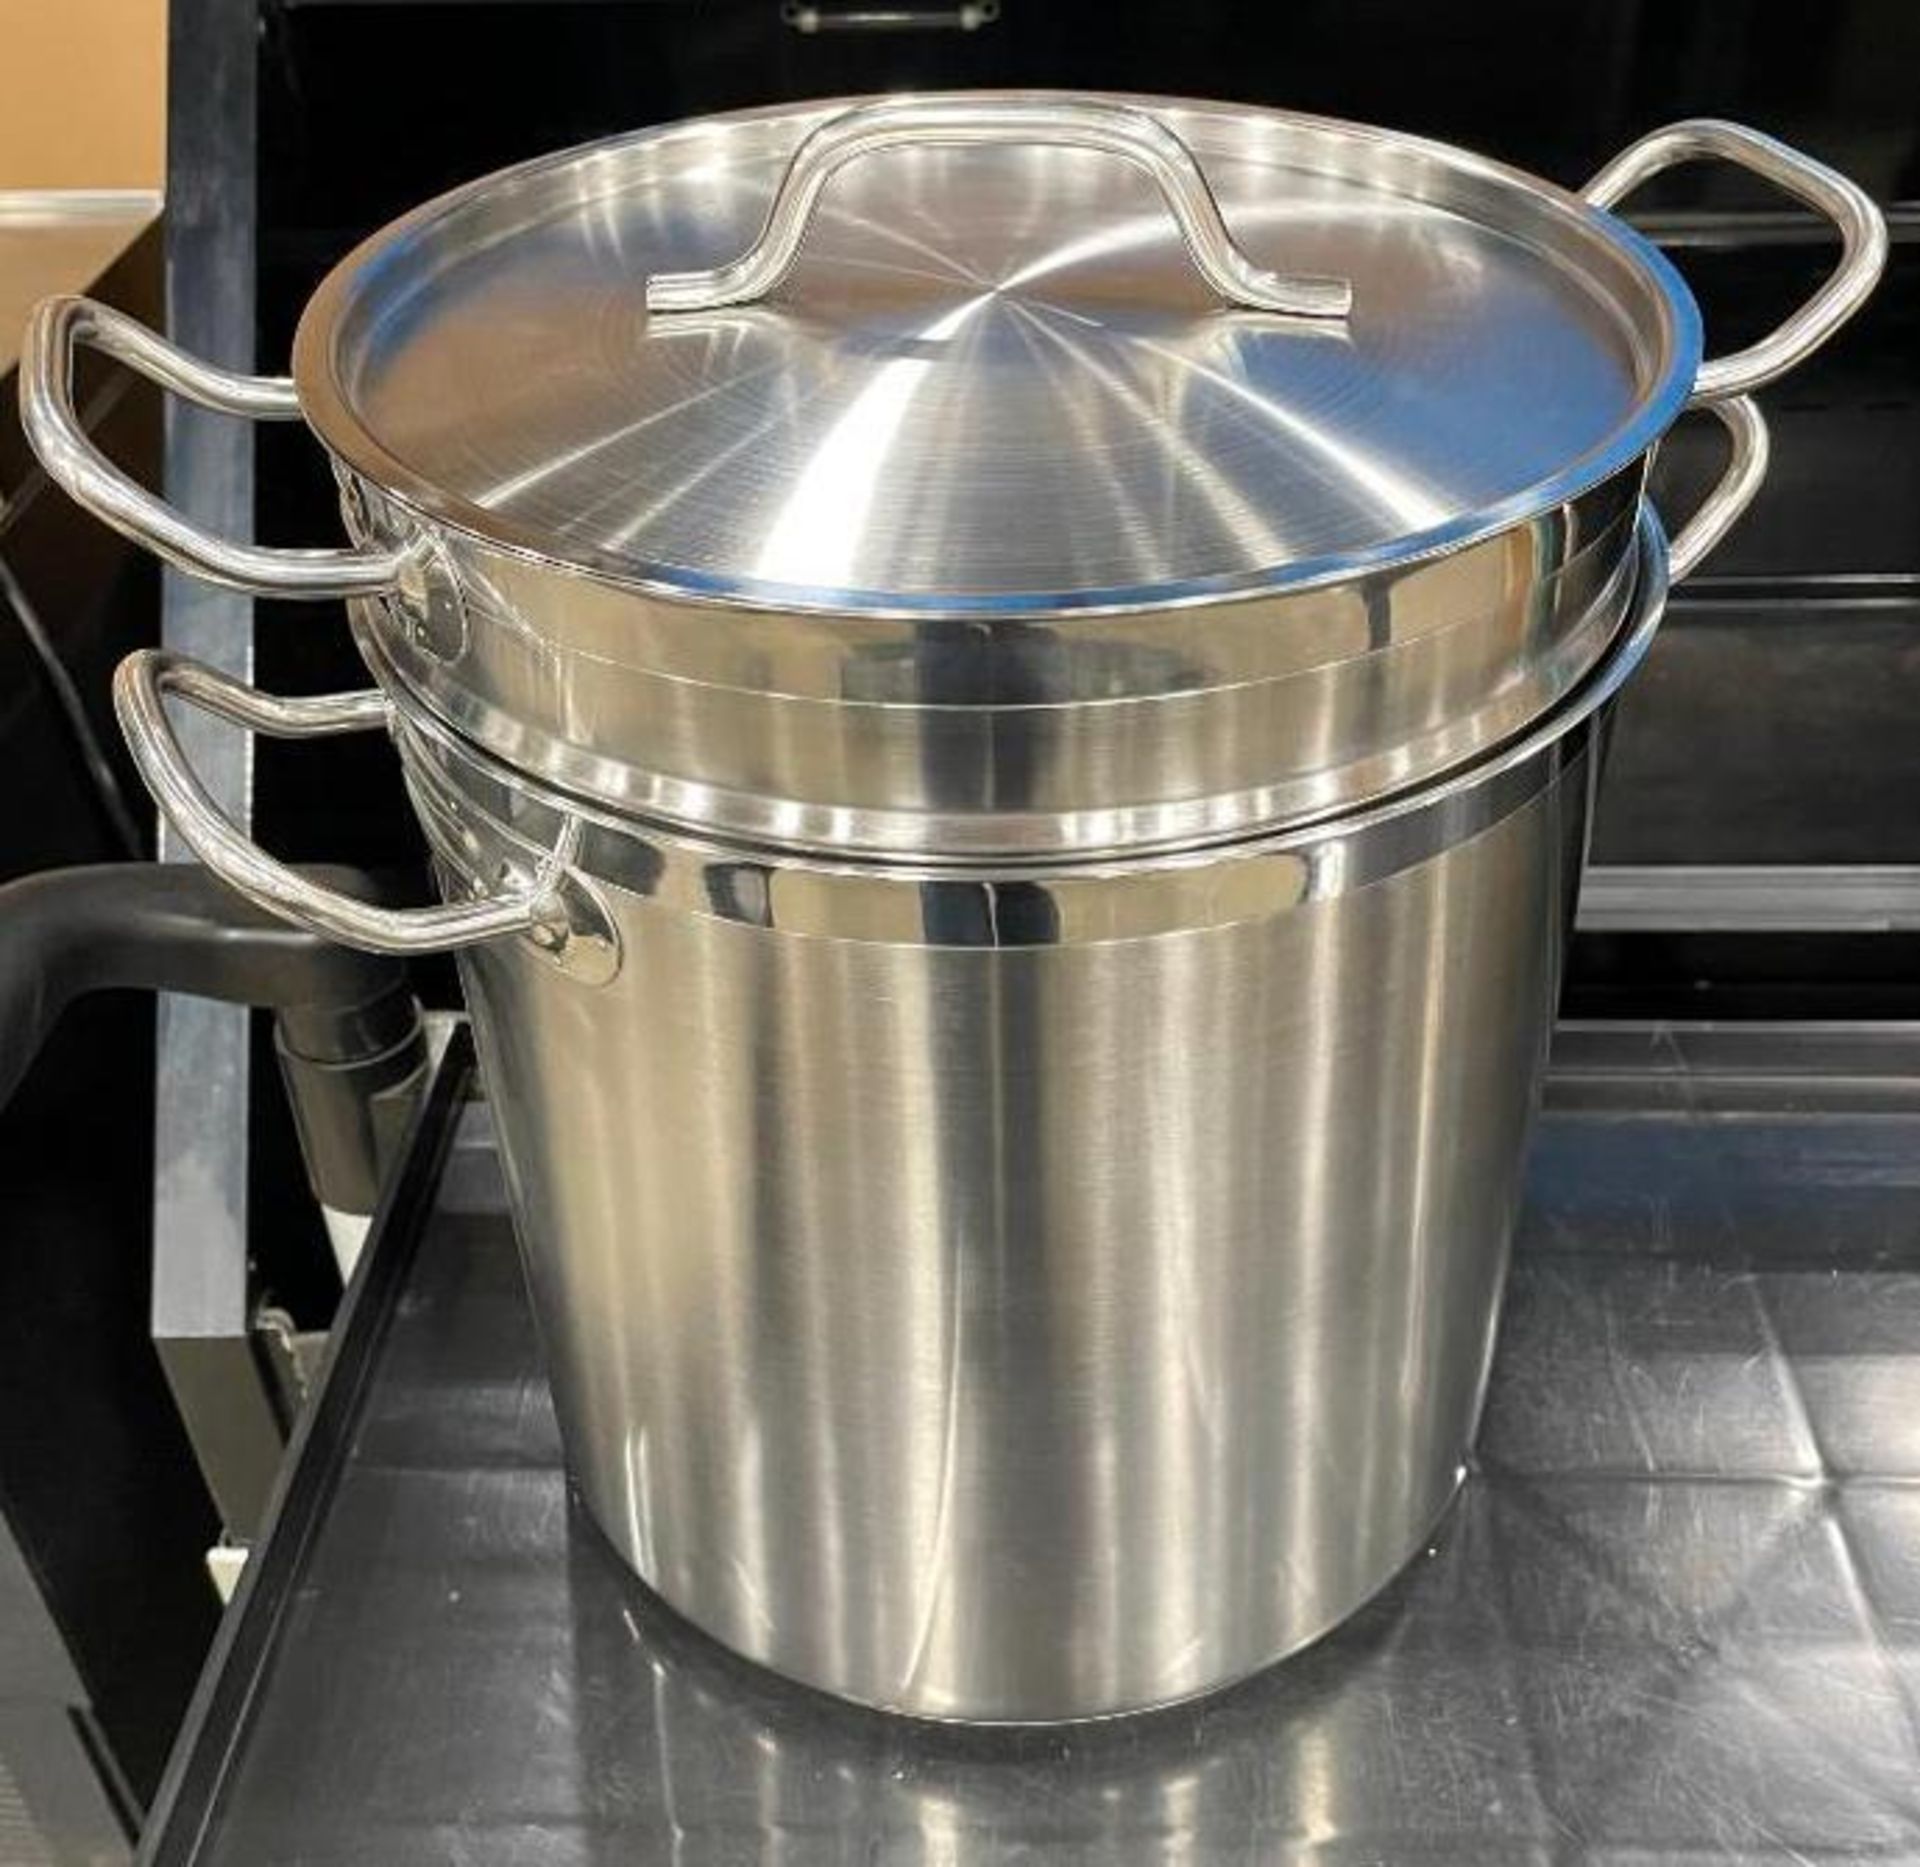 20QT HEAVY DUTY STAINLESS STOCK POT INDUCTION CAPABLE & STEAMER BASKET, JR 47202 & 47204 - NEW - Image 2 of 6